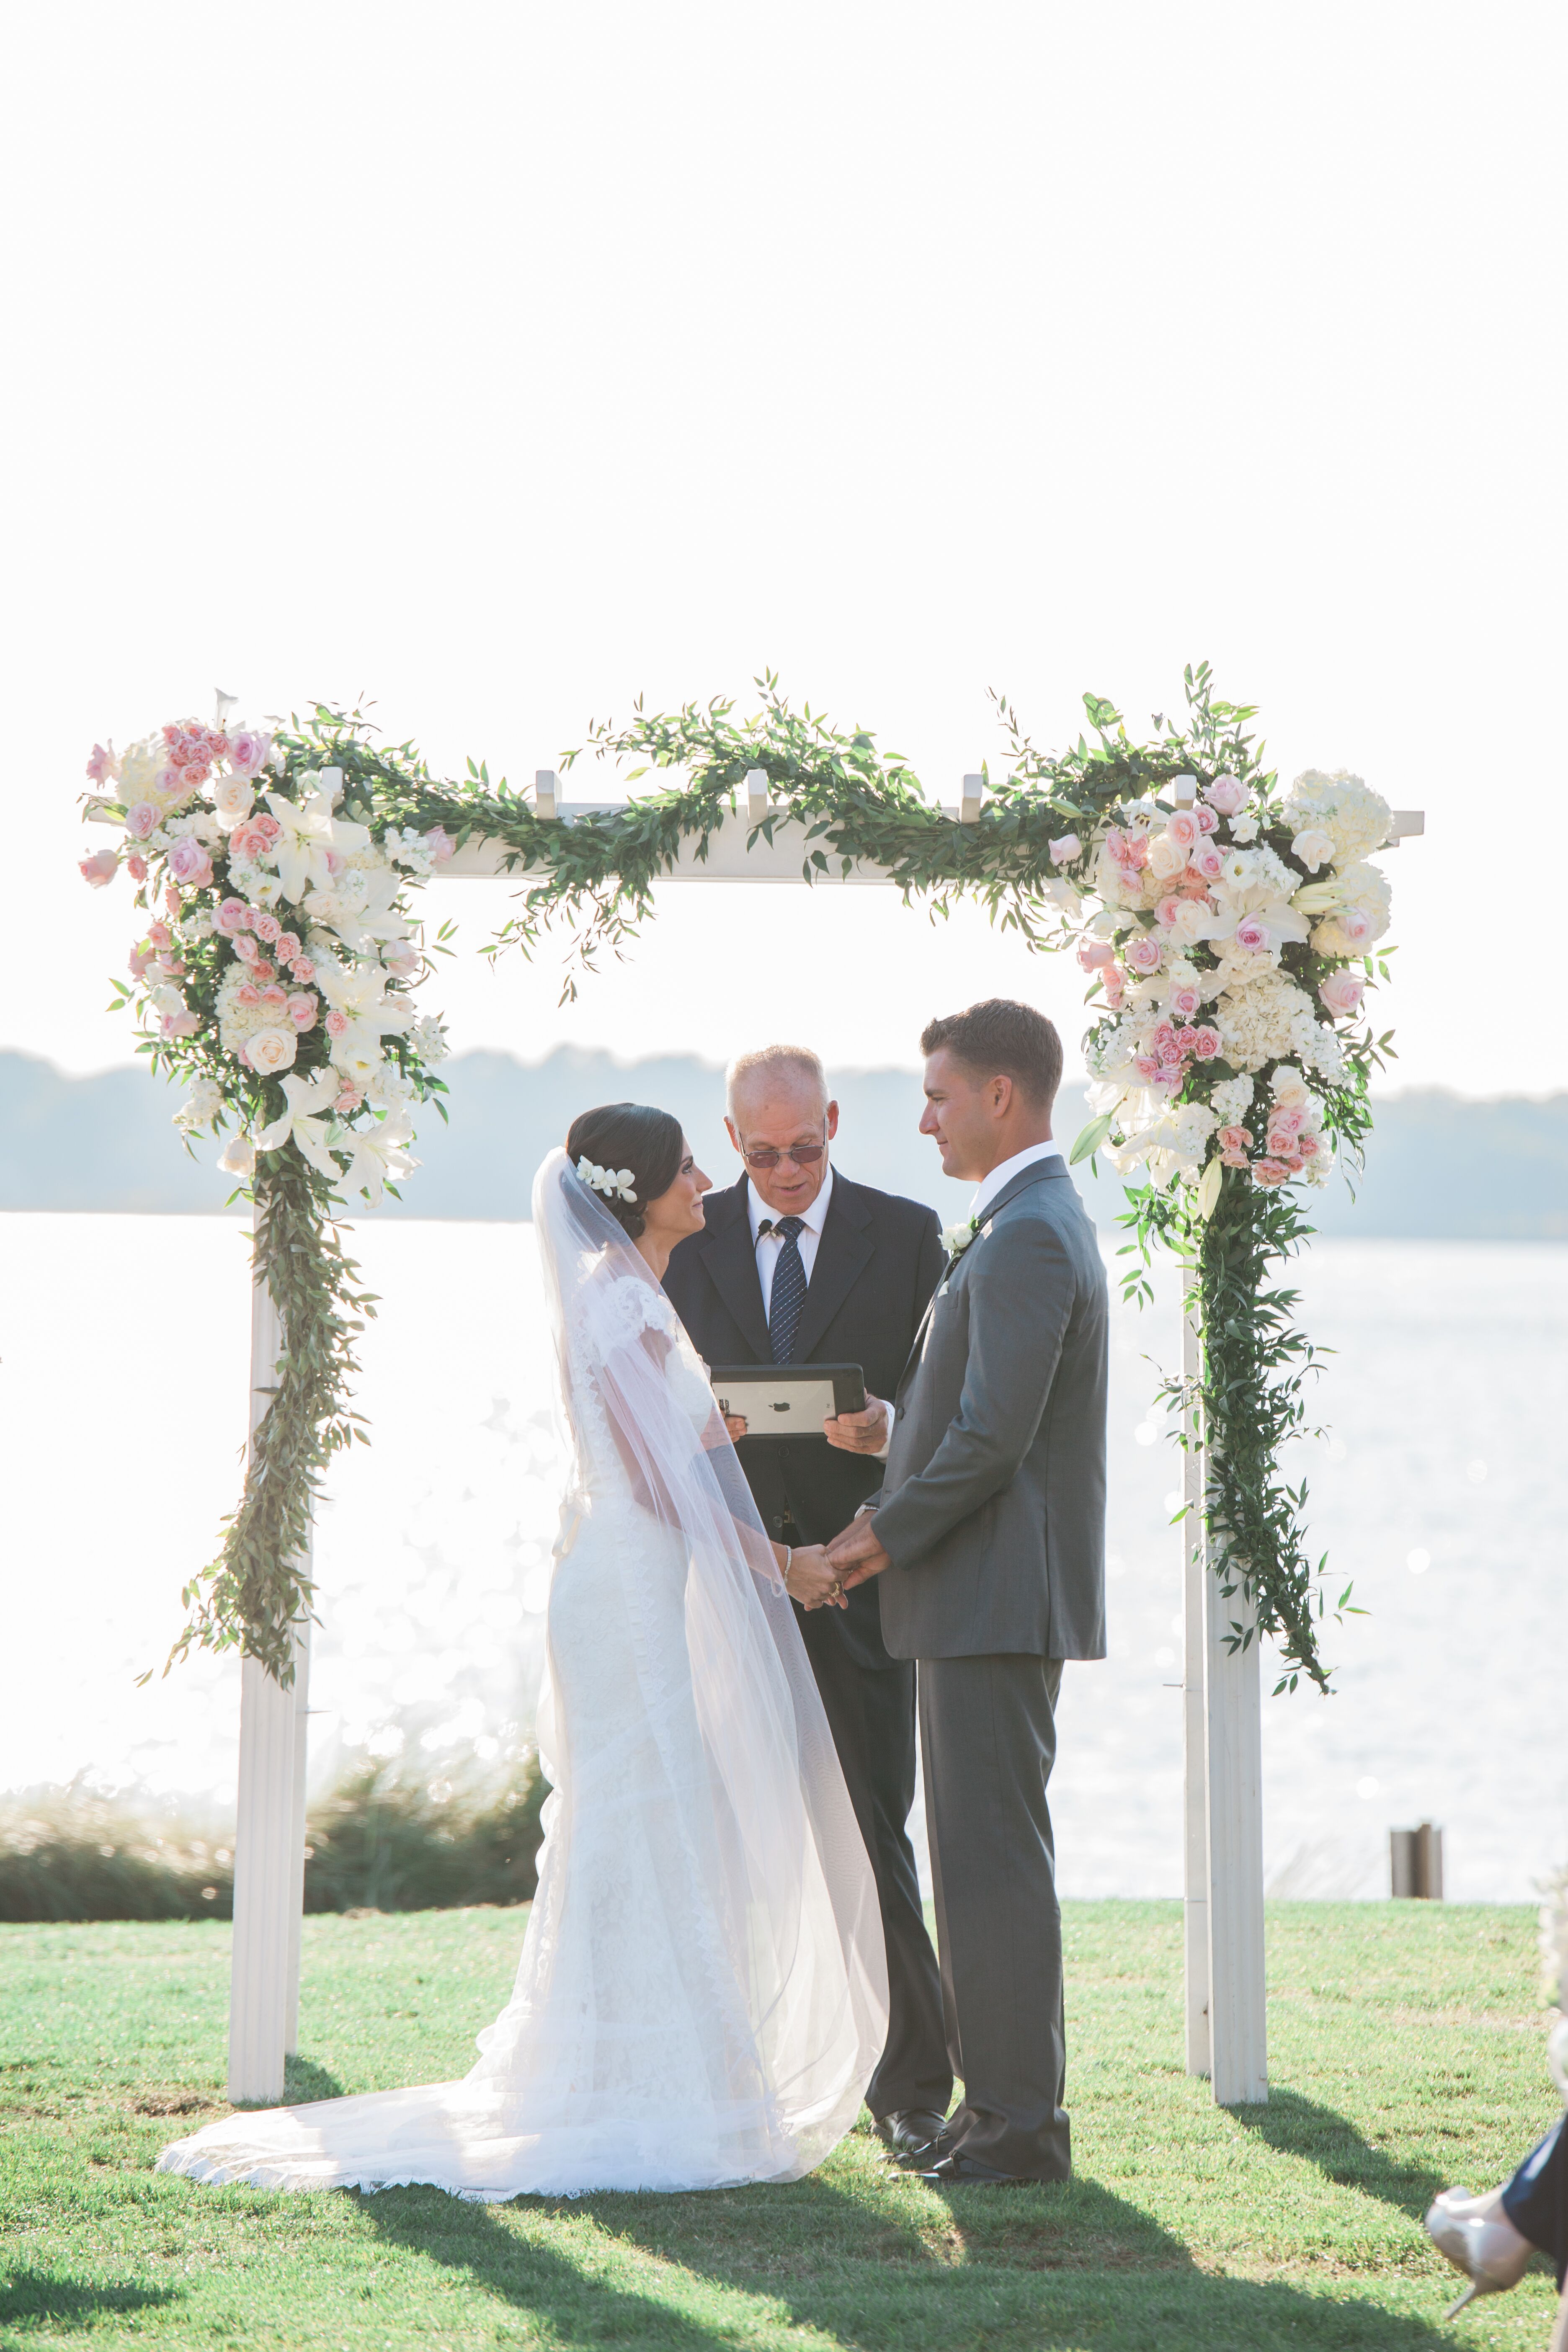 Blush and Ivory Flower-Decorated Wooden Wedding Arch